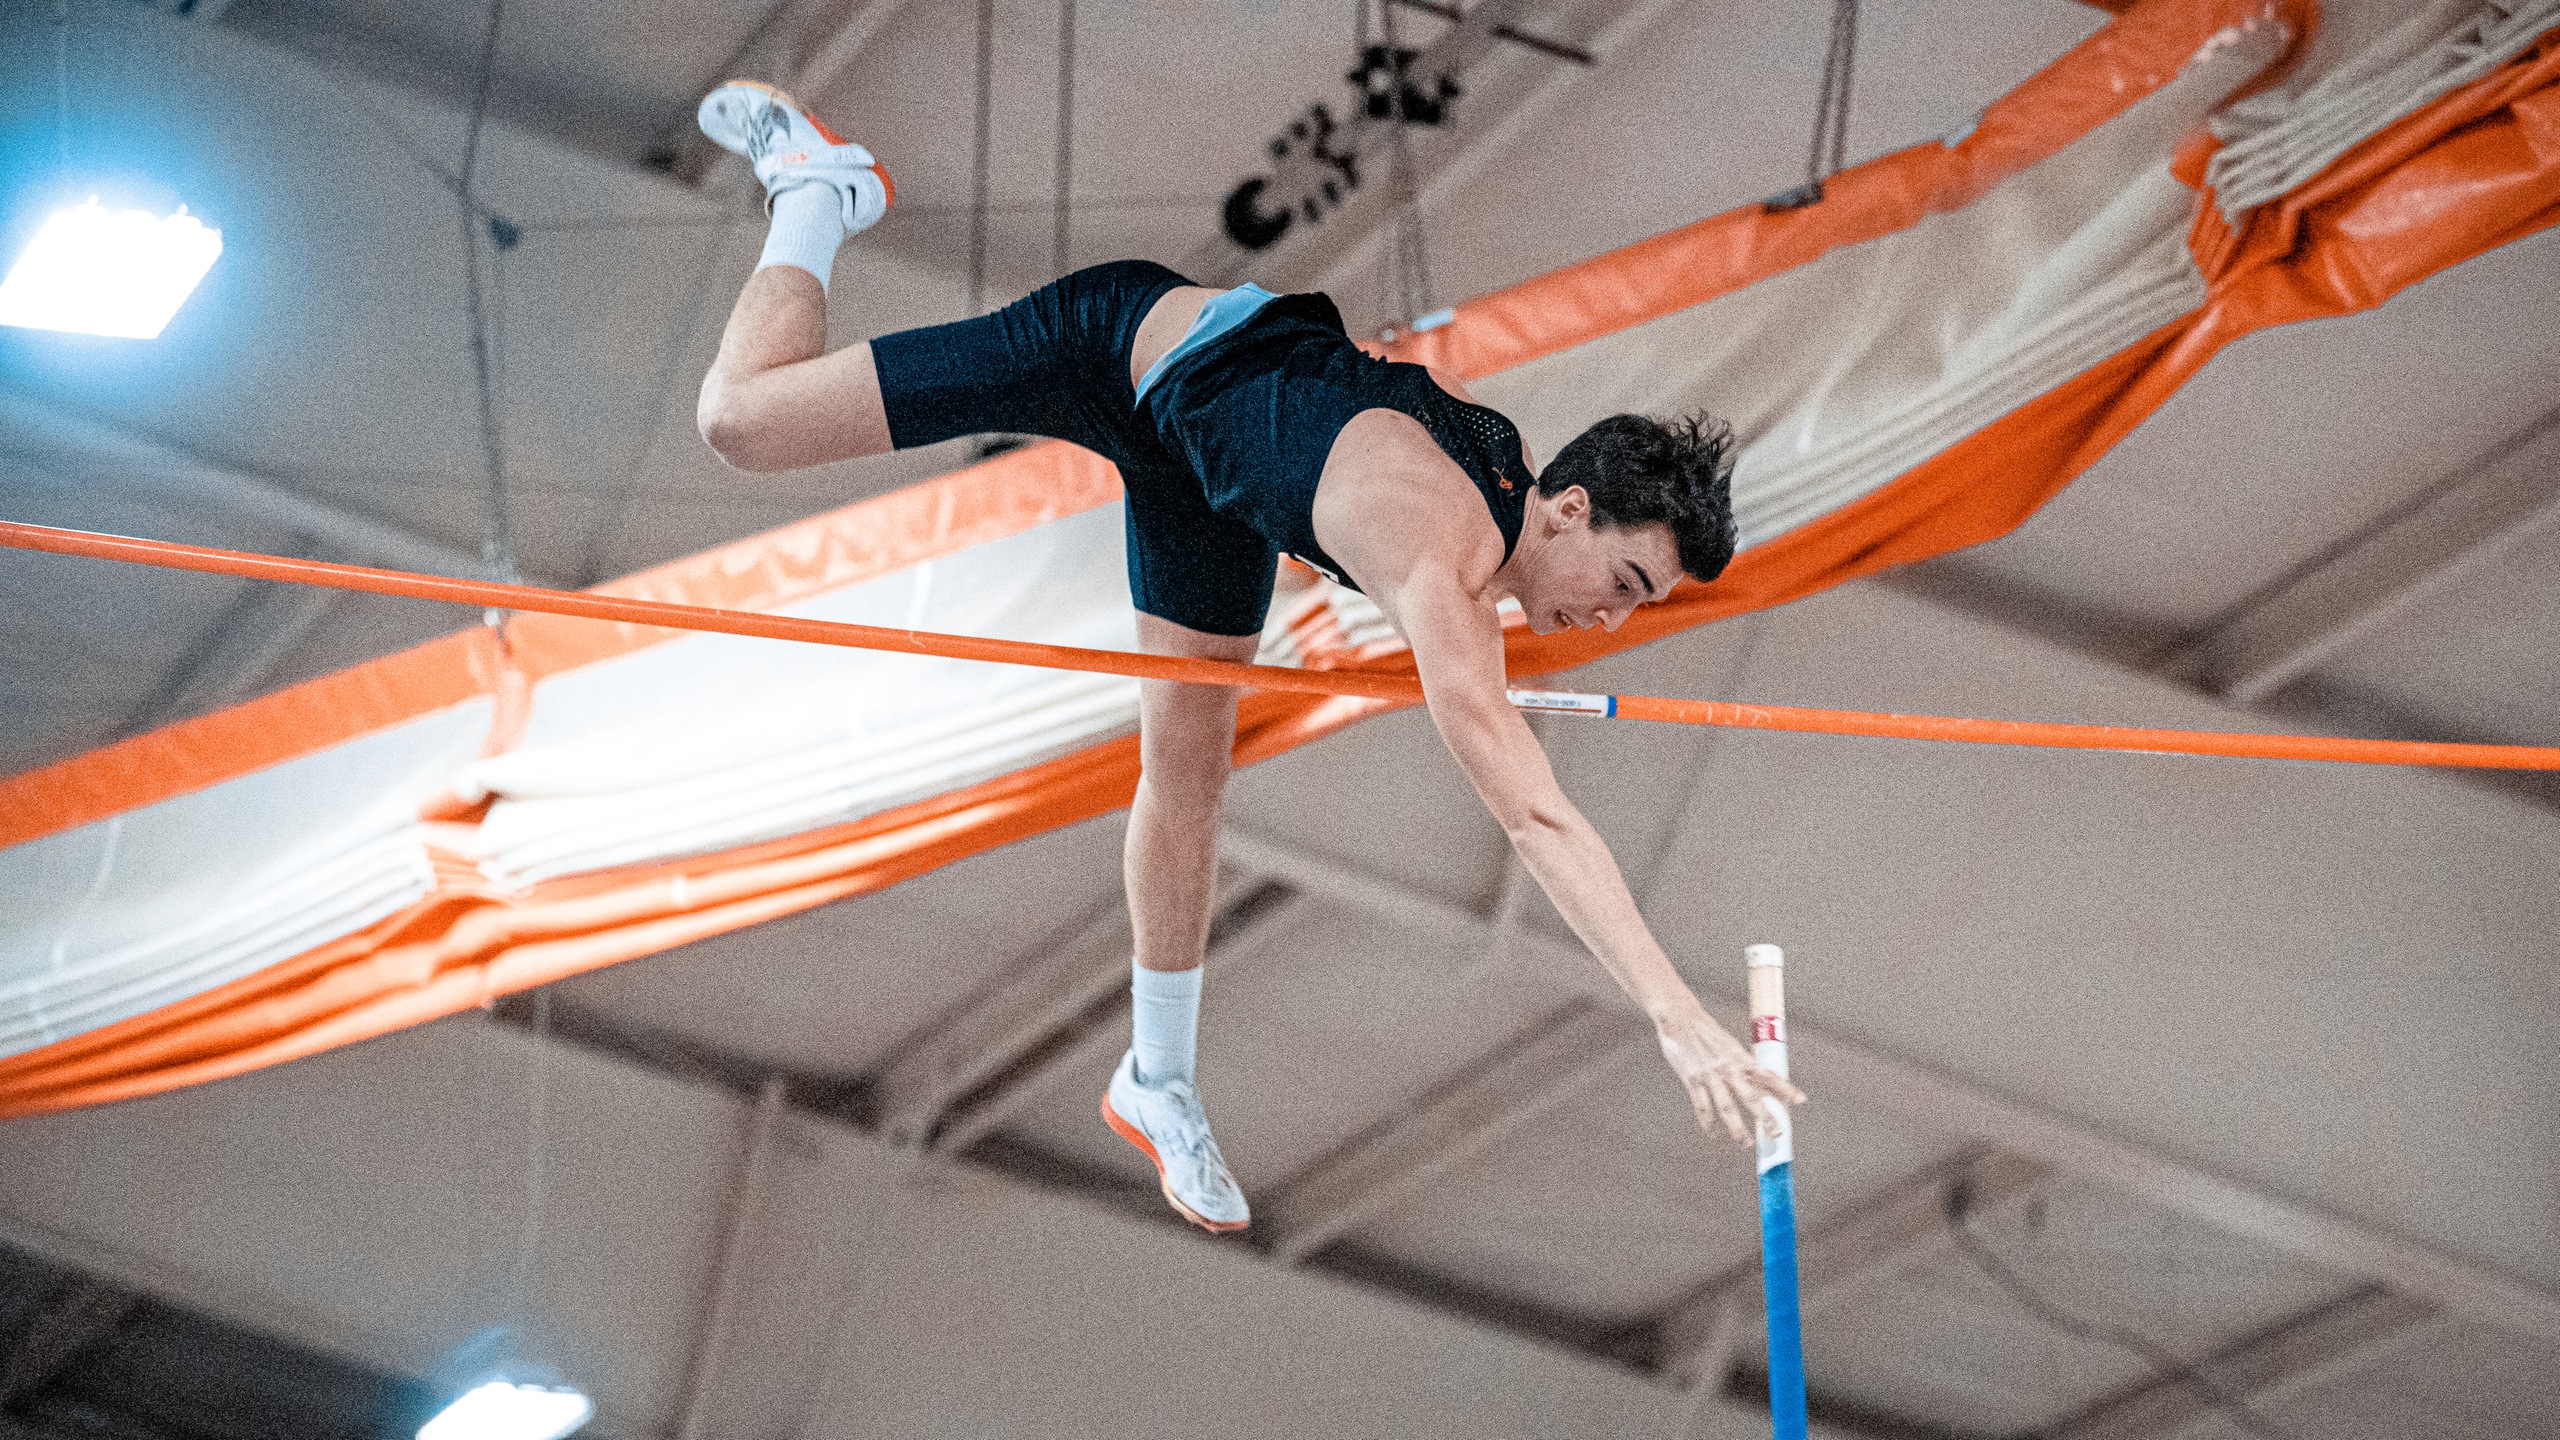 Pole Vaulter, Jacob Michael in the air